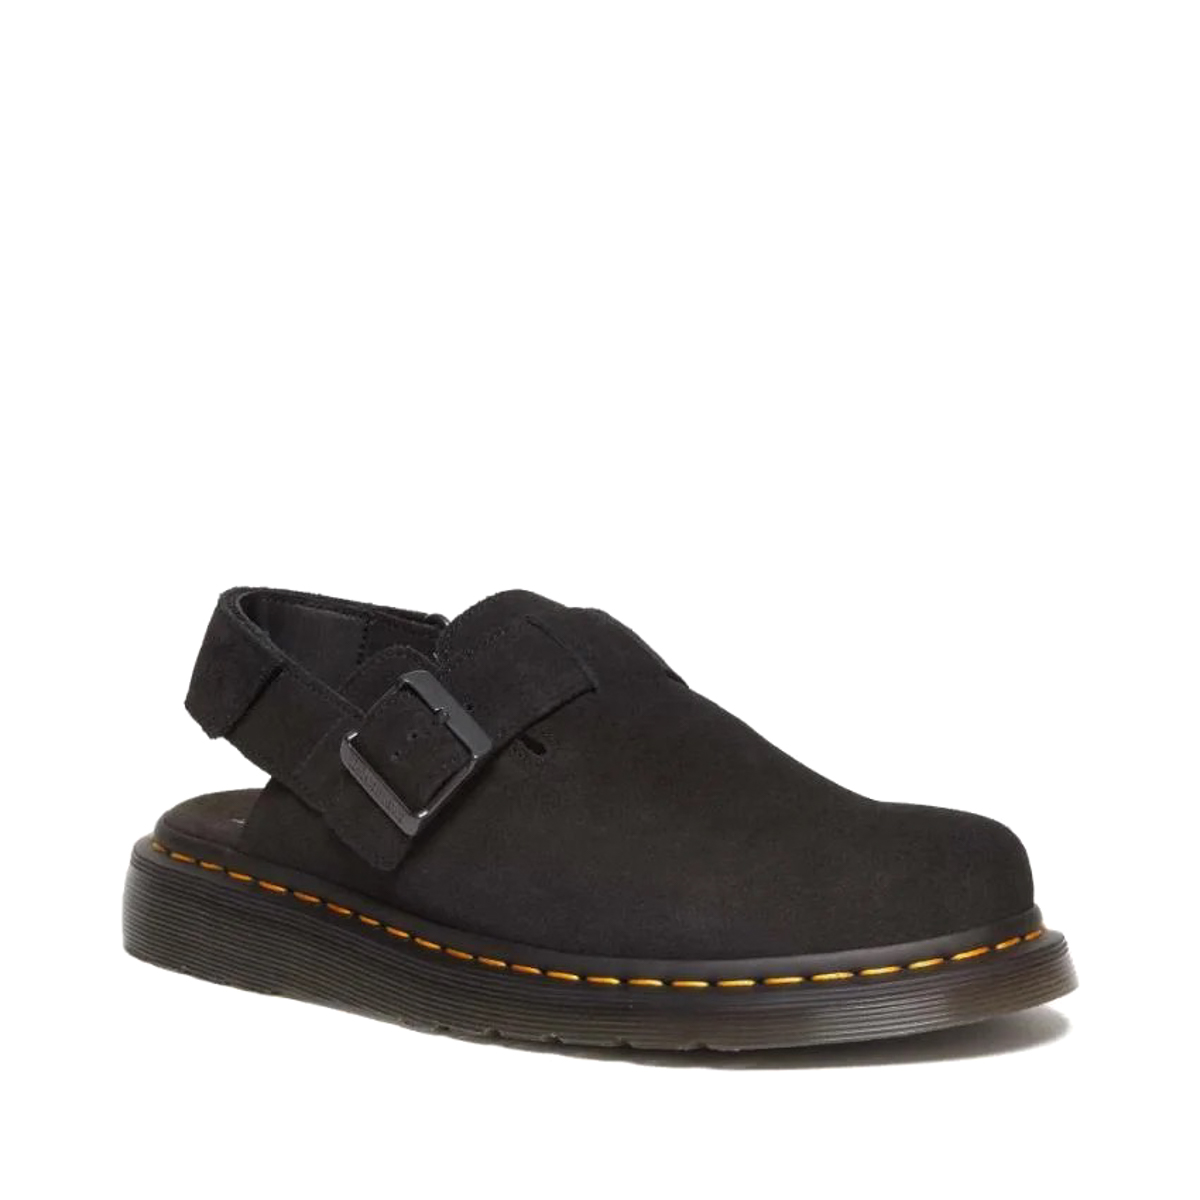 Dr Martens Jorge II Black Suede - Issimo Shoes